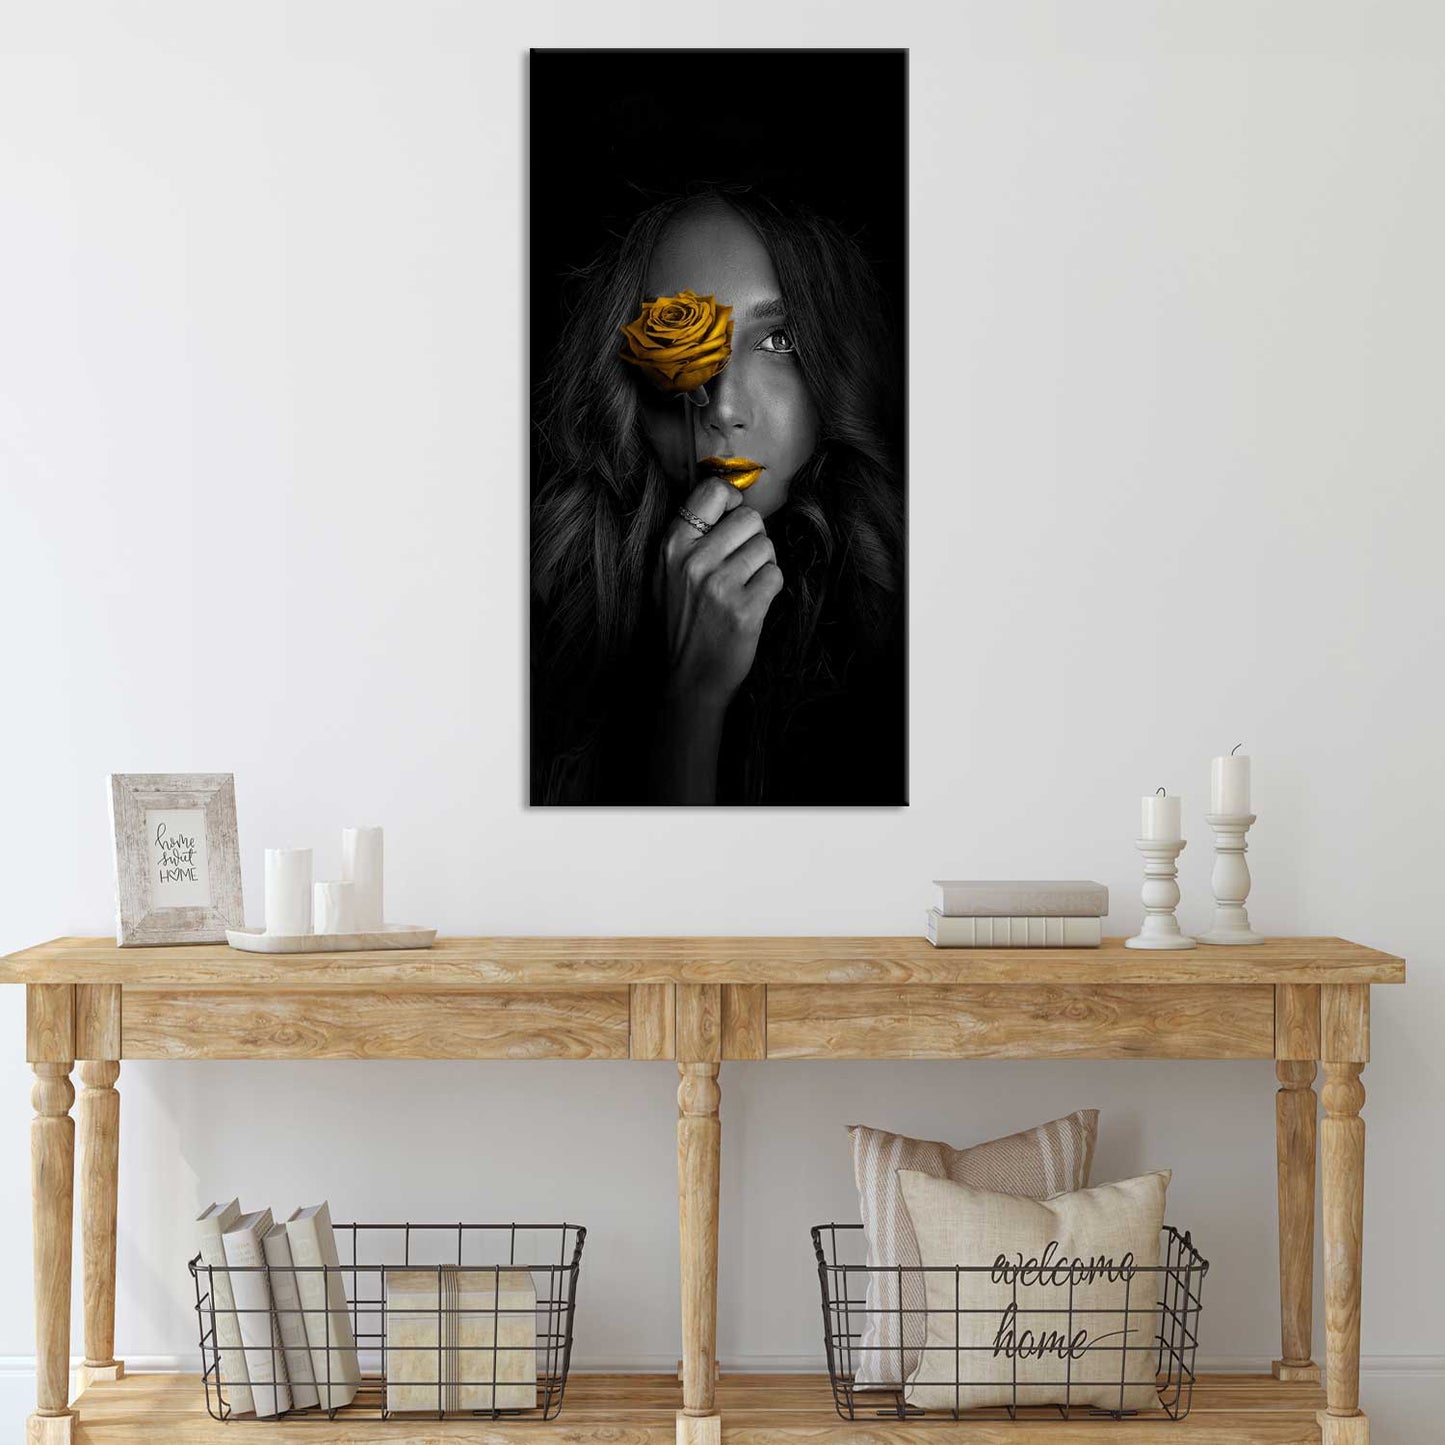 Girl With Golden Flower Abstract Wall Painting